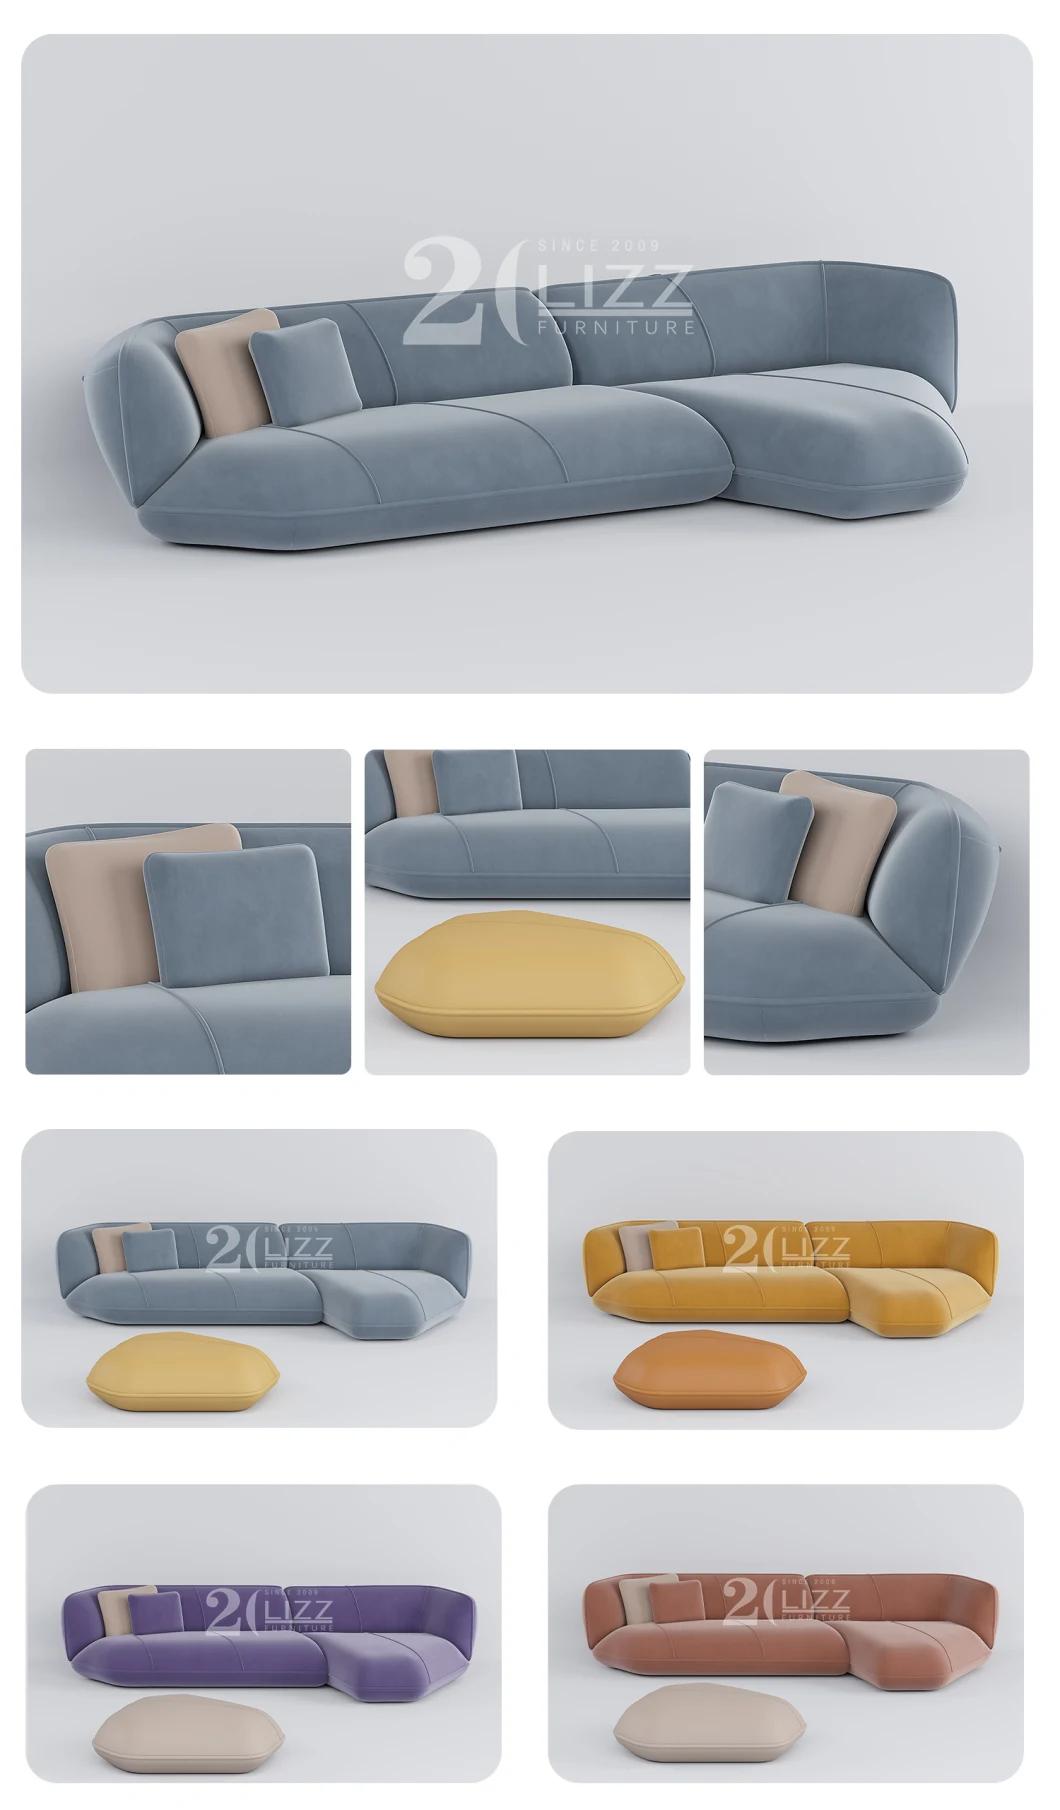 European Sectional Living Room Hotel Furniture Luxury Velvet Home Lounge Sofa Leisure Fabric Couch